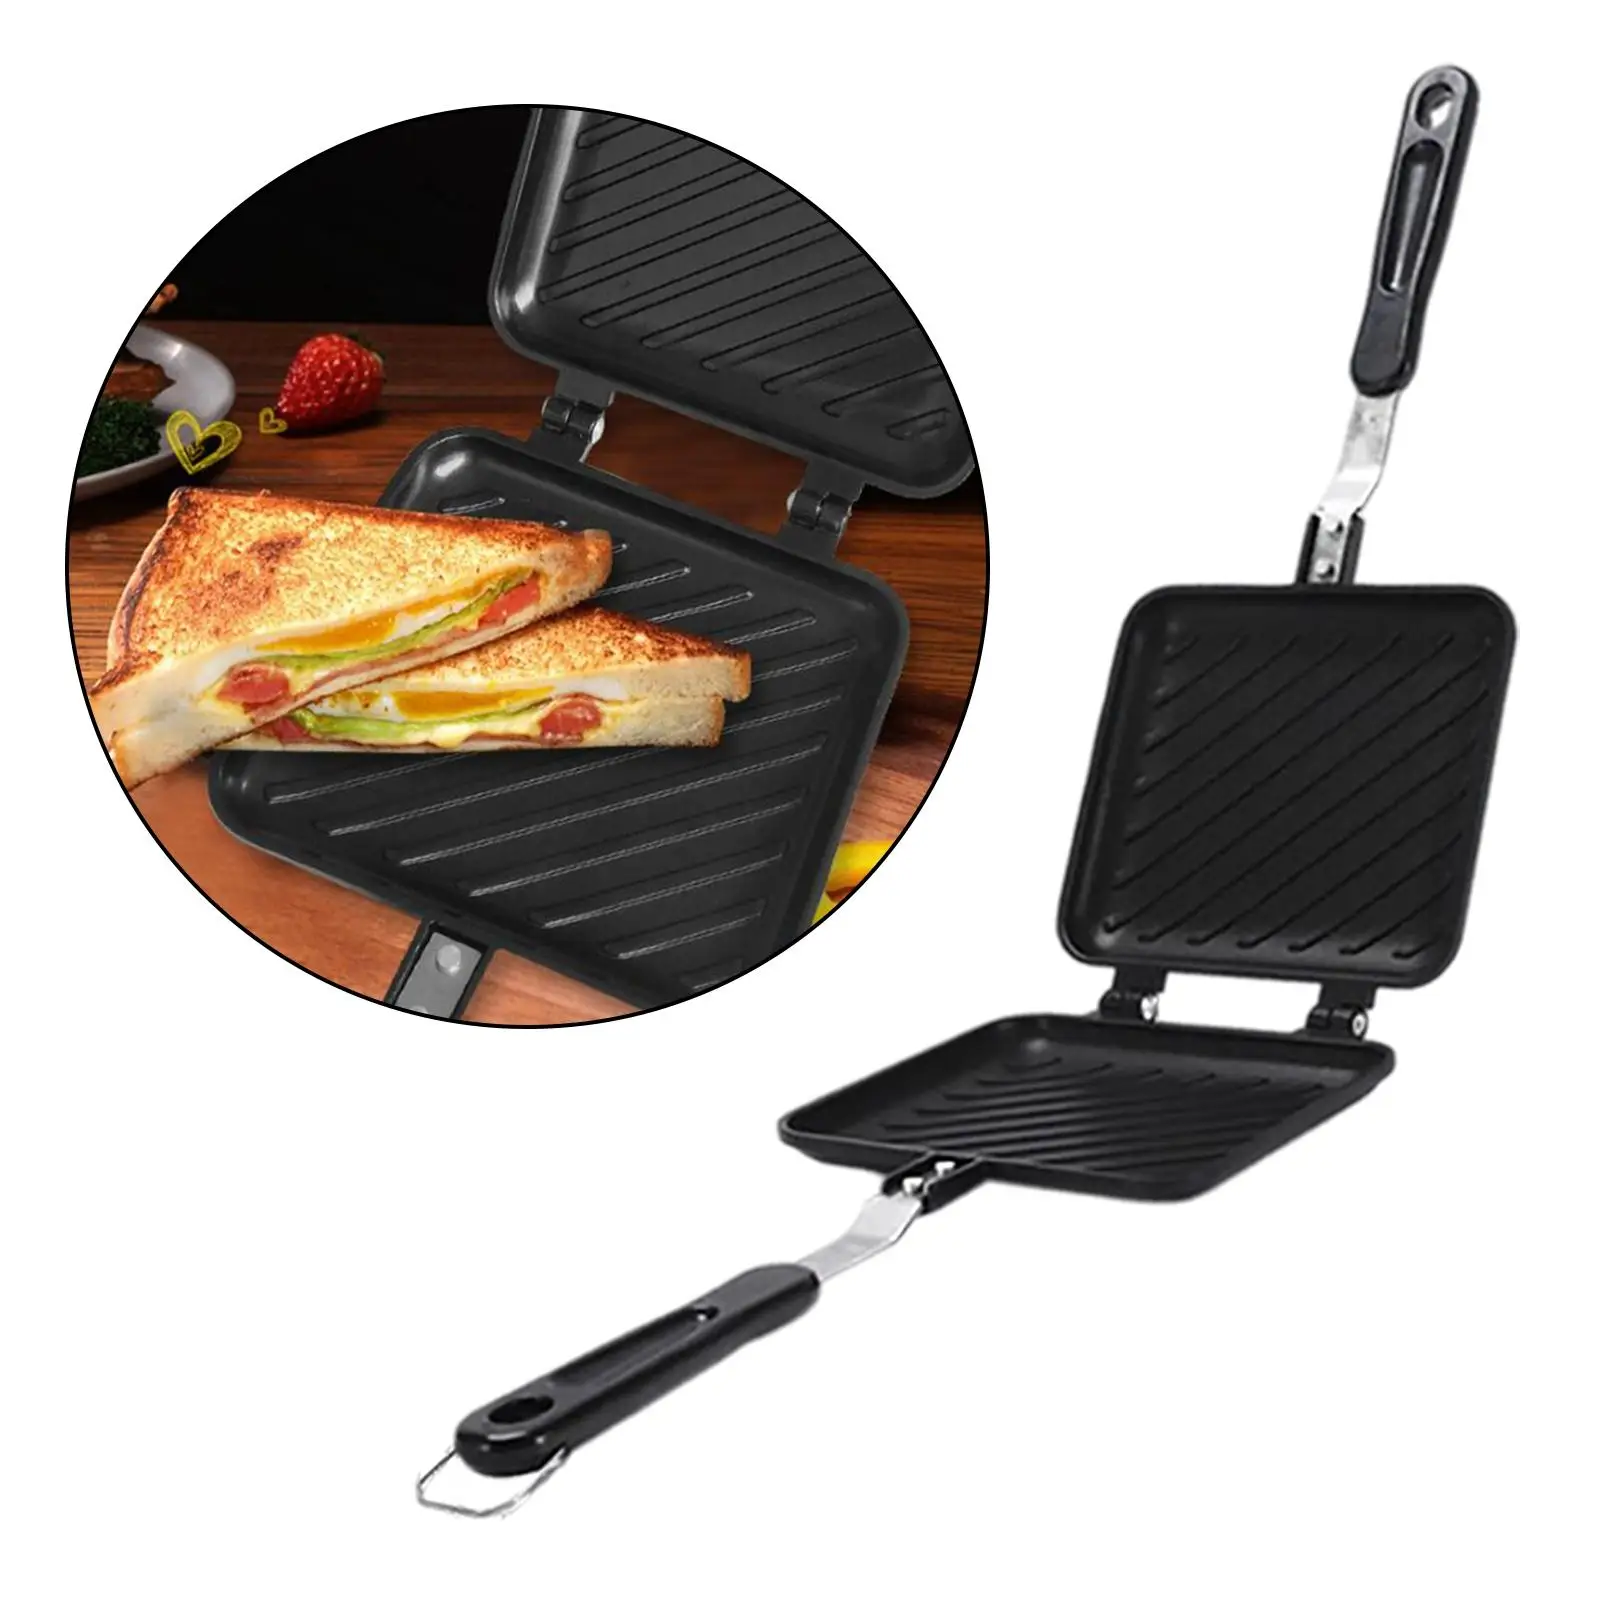 Cooking Pan Bread Toast Cooking Tool Pancakes Maker Egg Pan Ham Burger Omelet Sandwiches Omelettes for Electric Ceramic Stove